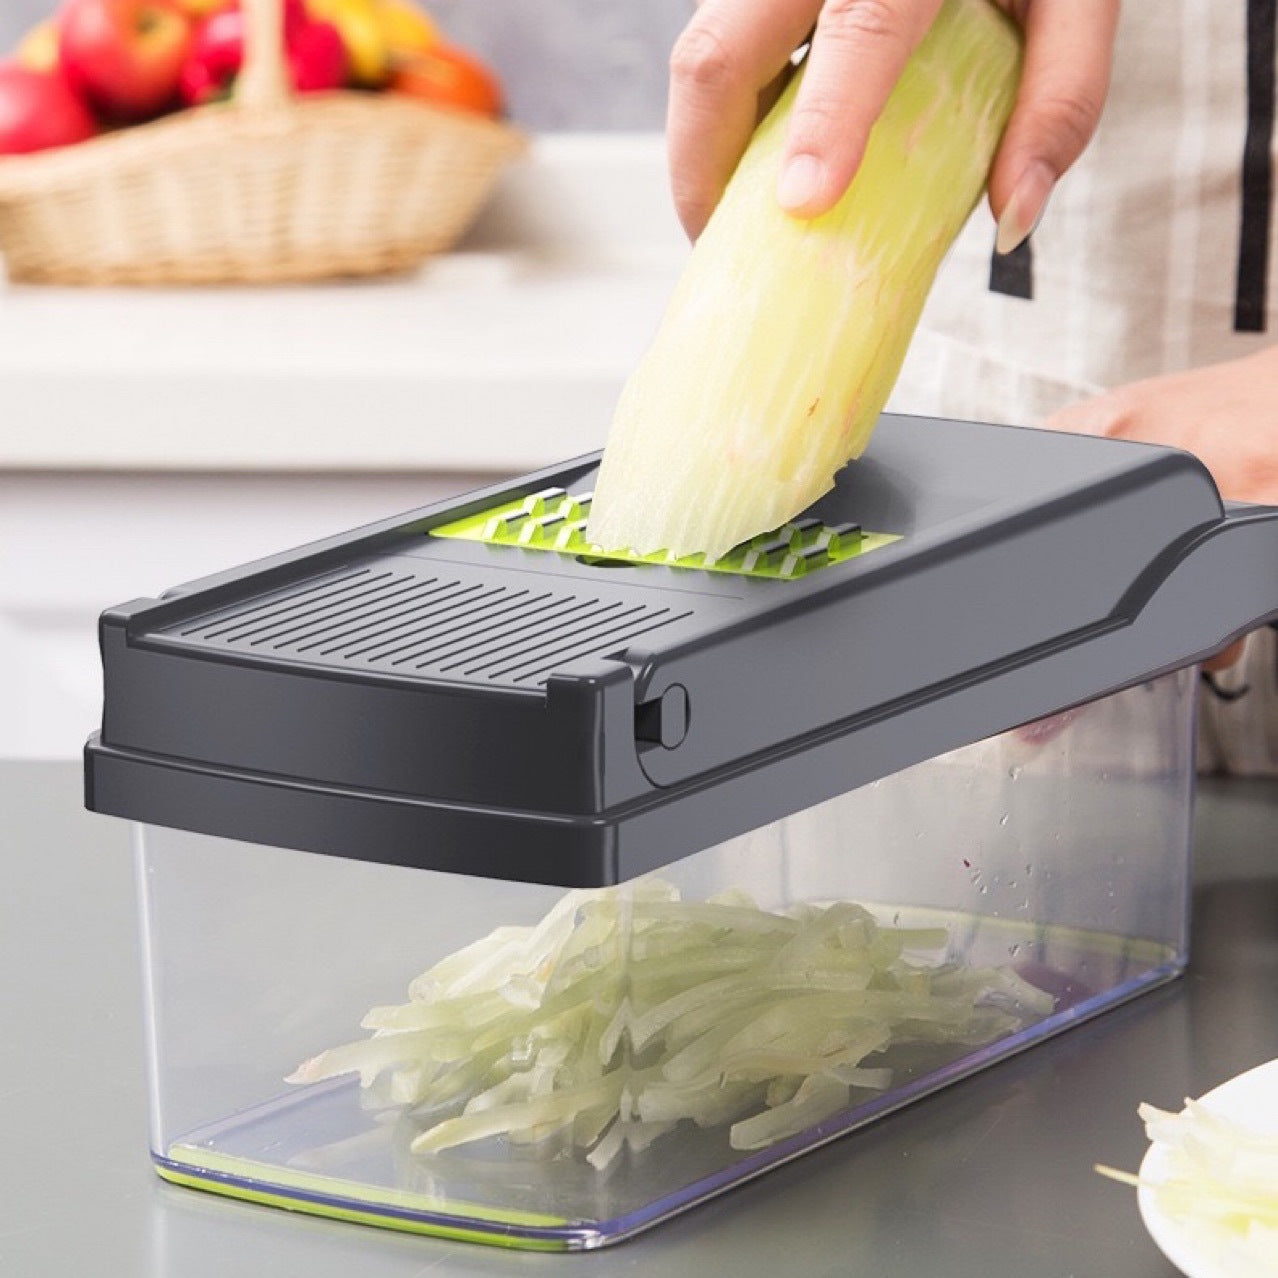 The Perfect Cut: 12-in-1 Vegetable Chopper and Mandolin Slicer